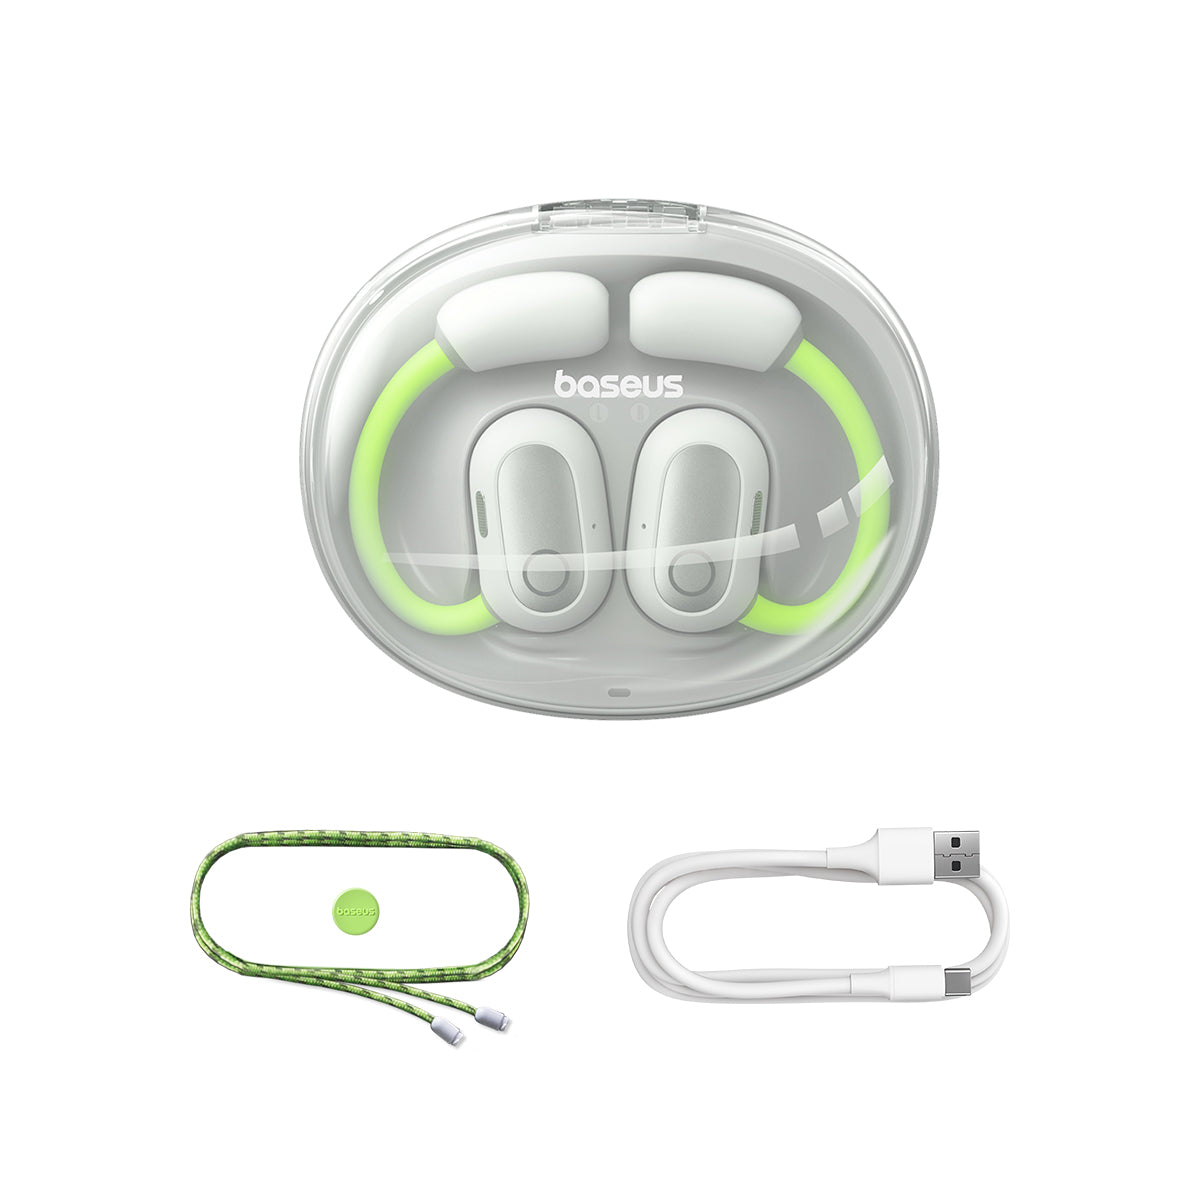 Baseus_Eli_Sport_1_Open-Ear_TWS_Earbuds_Green_with cable